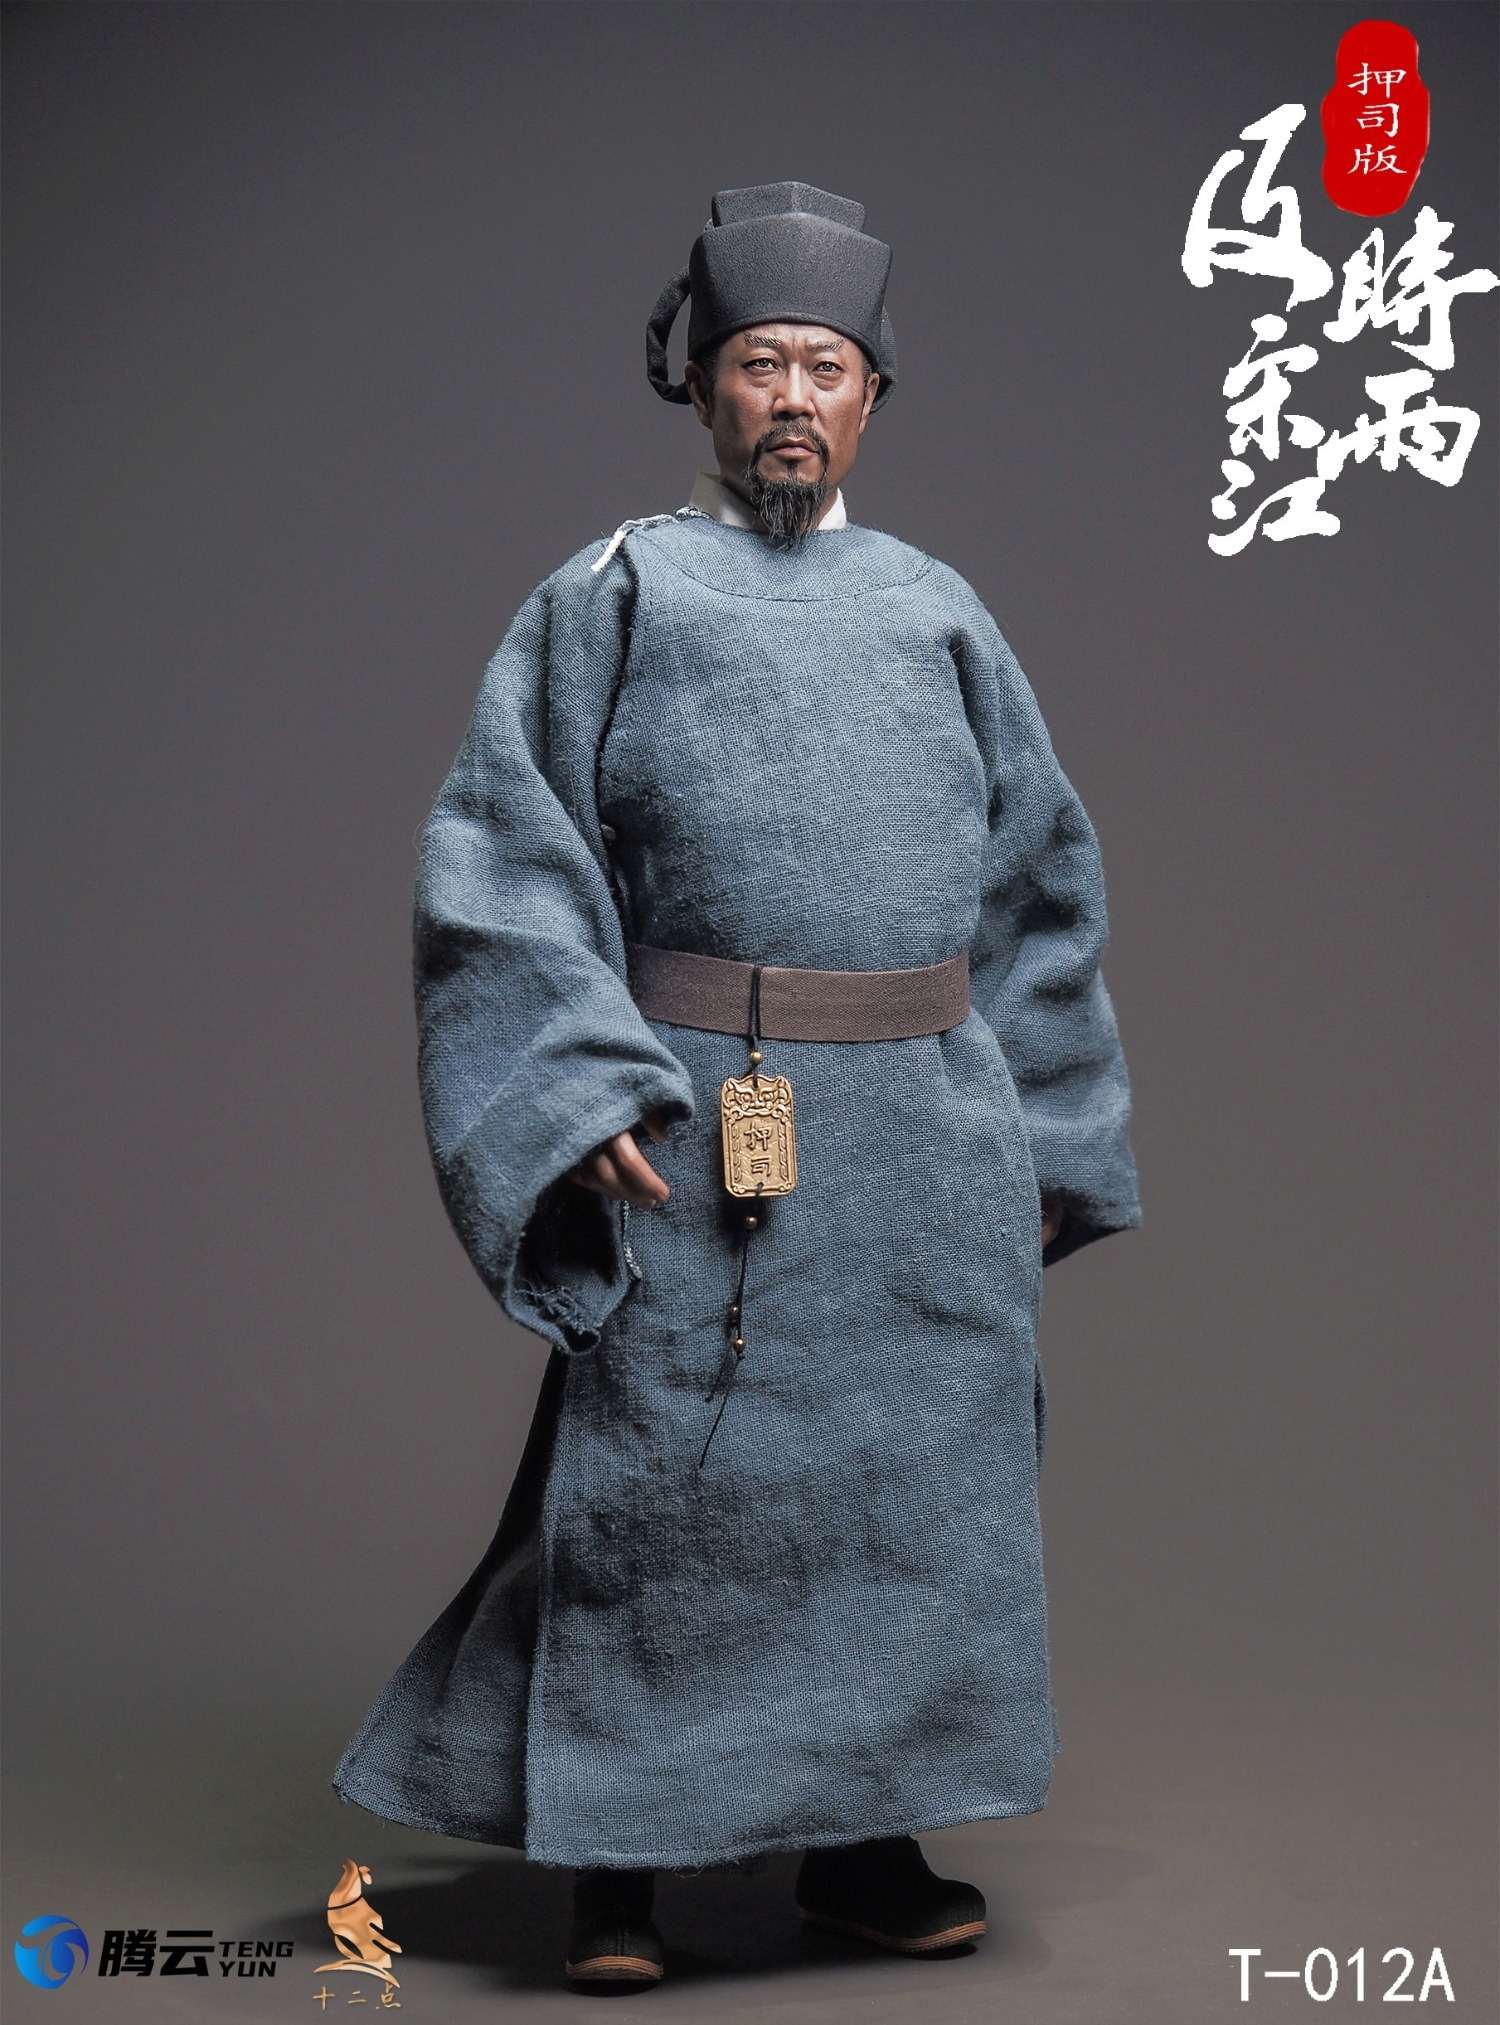 HeroSeries - NEW PRODUCT: Twelve O'Clock - Hero Series - Timely Rain Song Jiang (Oshi Version / Leader Version) #T-012A/B/C/D 08104